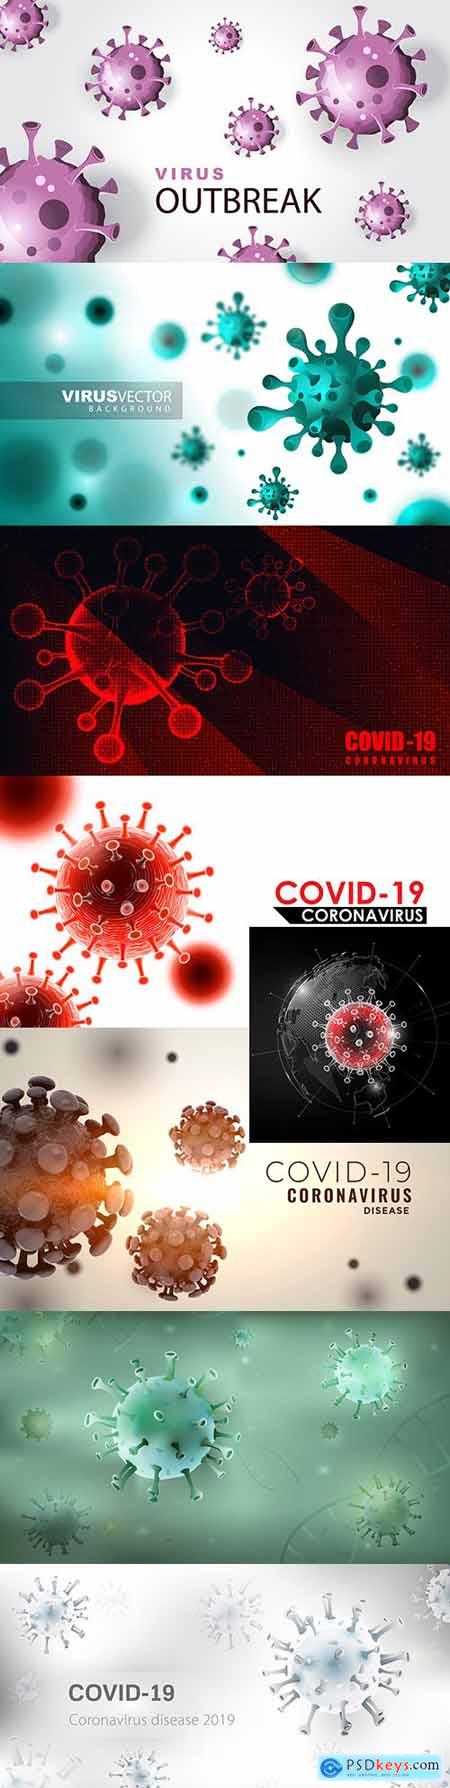 Coronavirus infection with 3d viral cell background